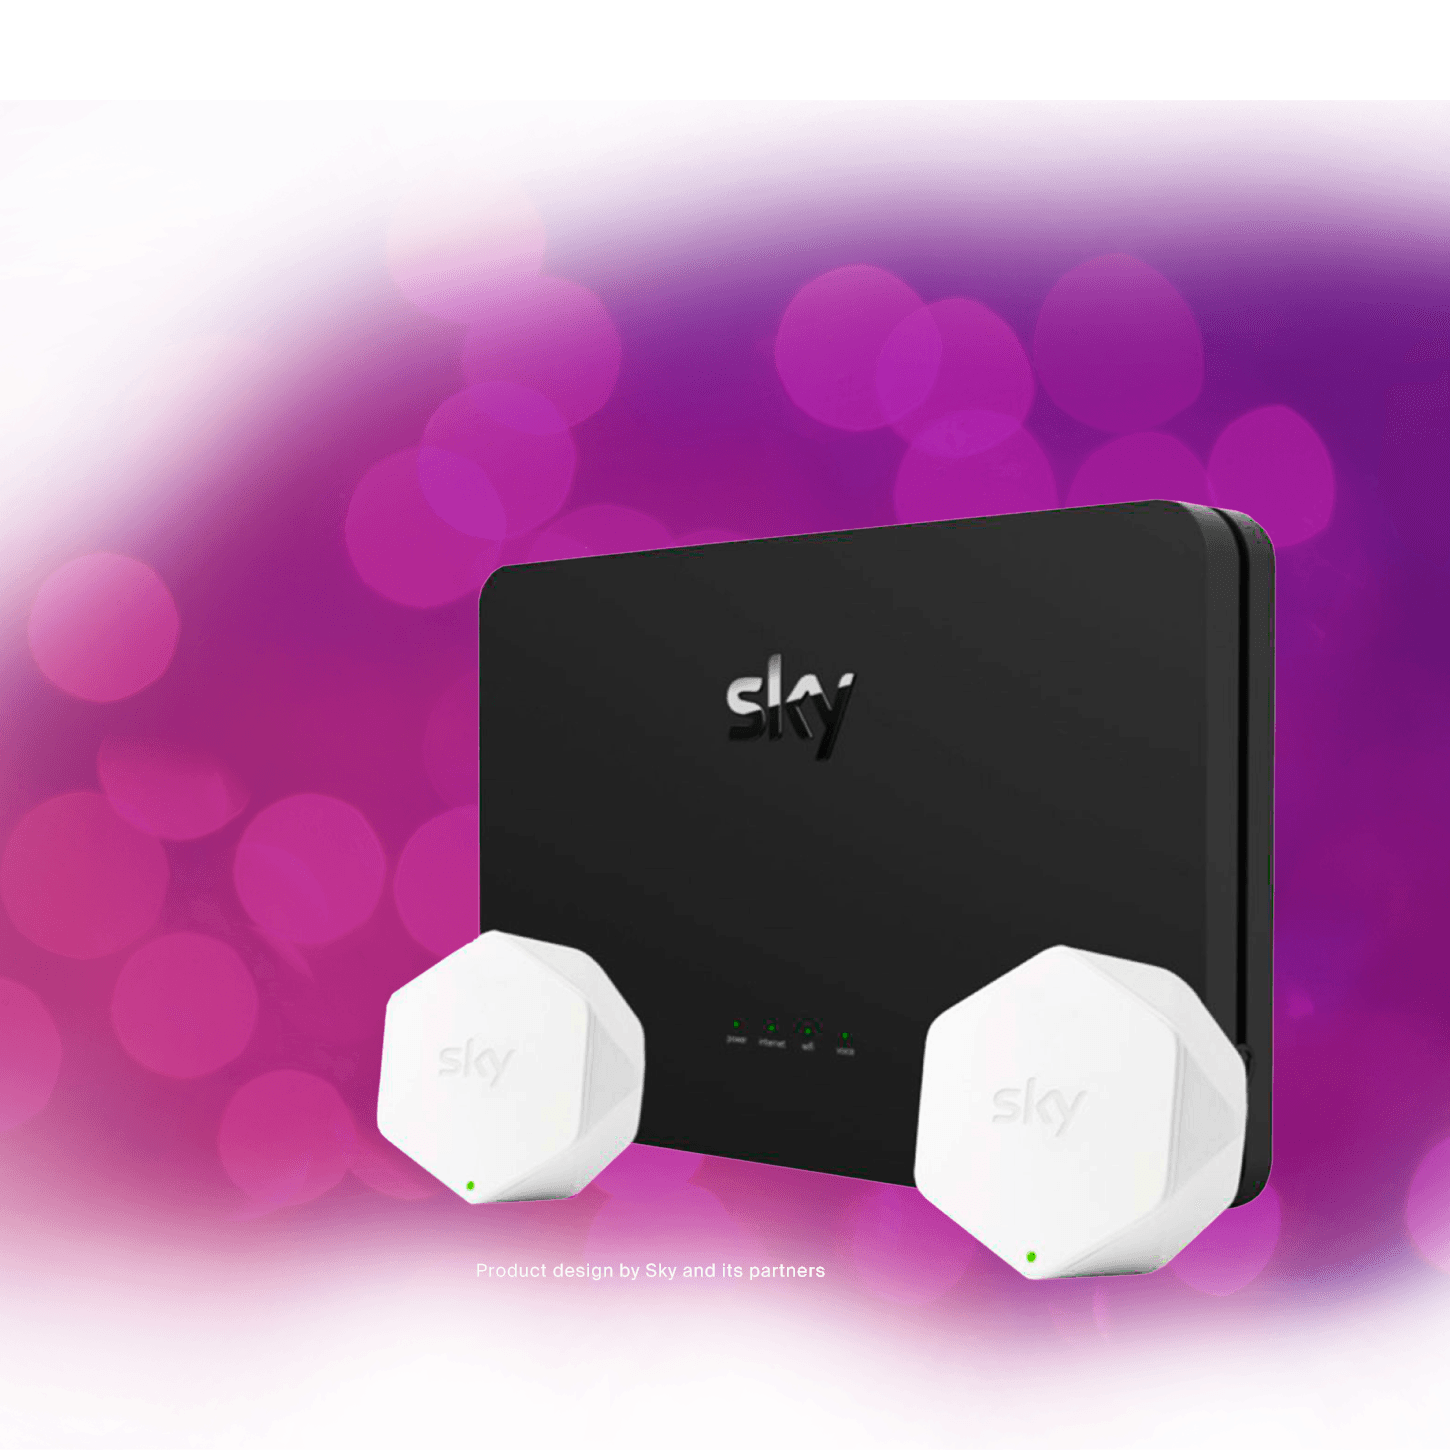 Sky Wifi Pod and integrated internet connection